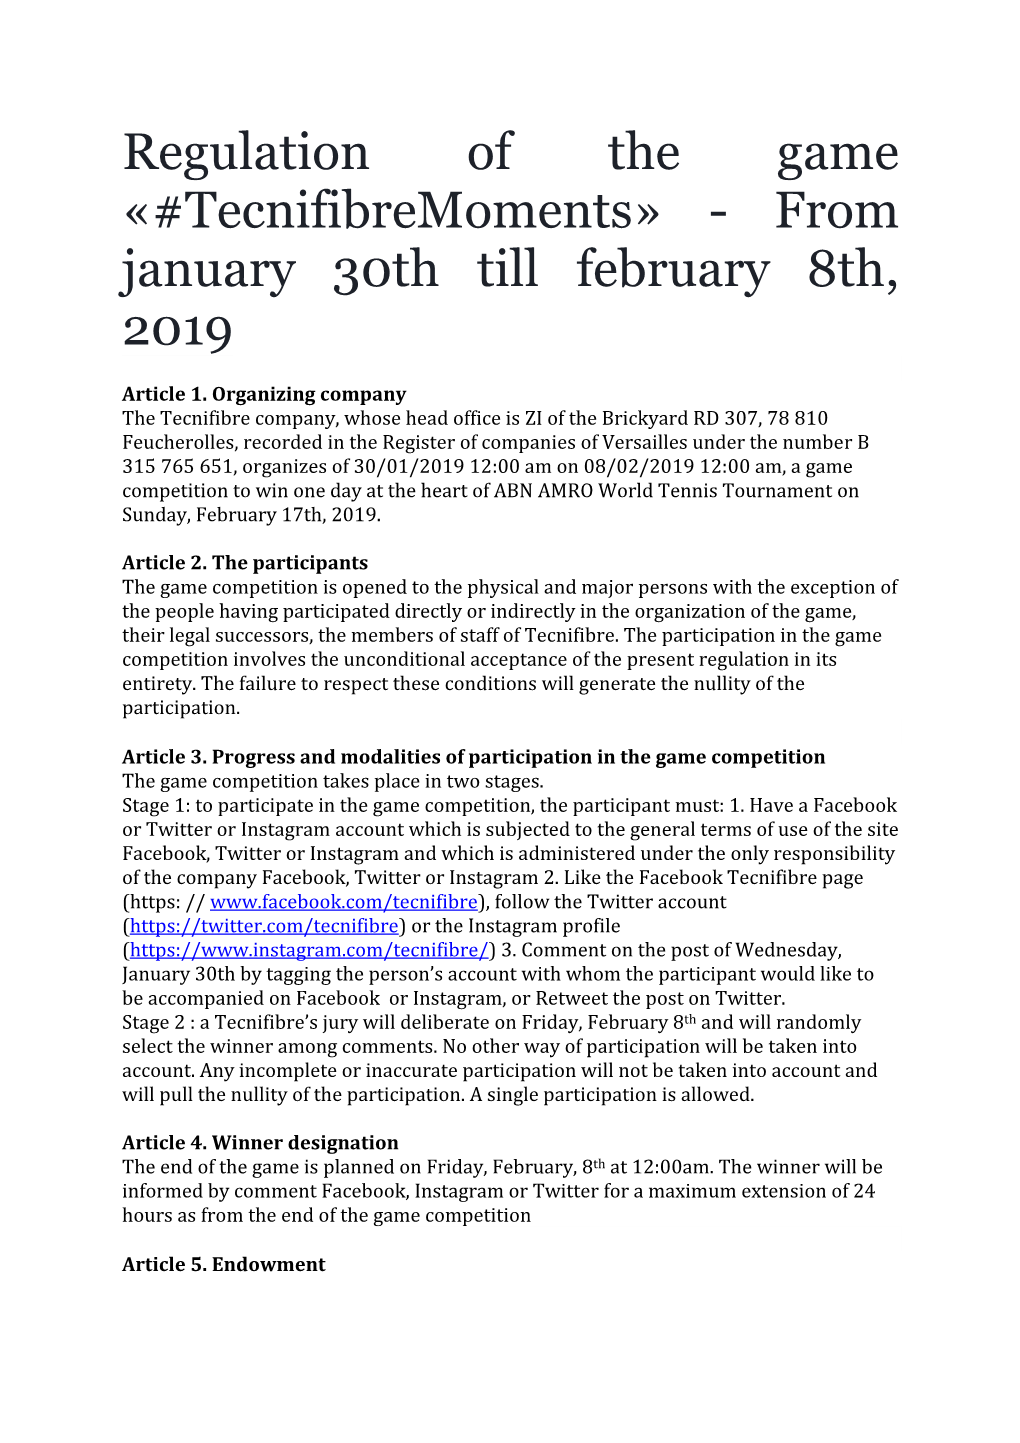 Regulation of the Game «#Tecnifibremoments» - from January 30Th Till February 8Th